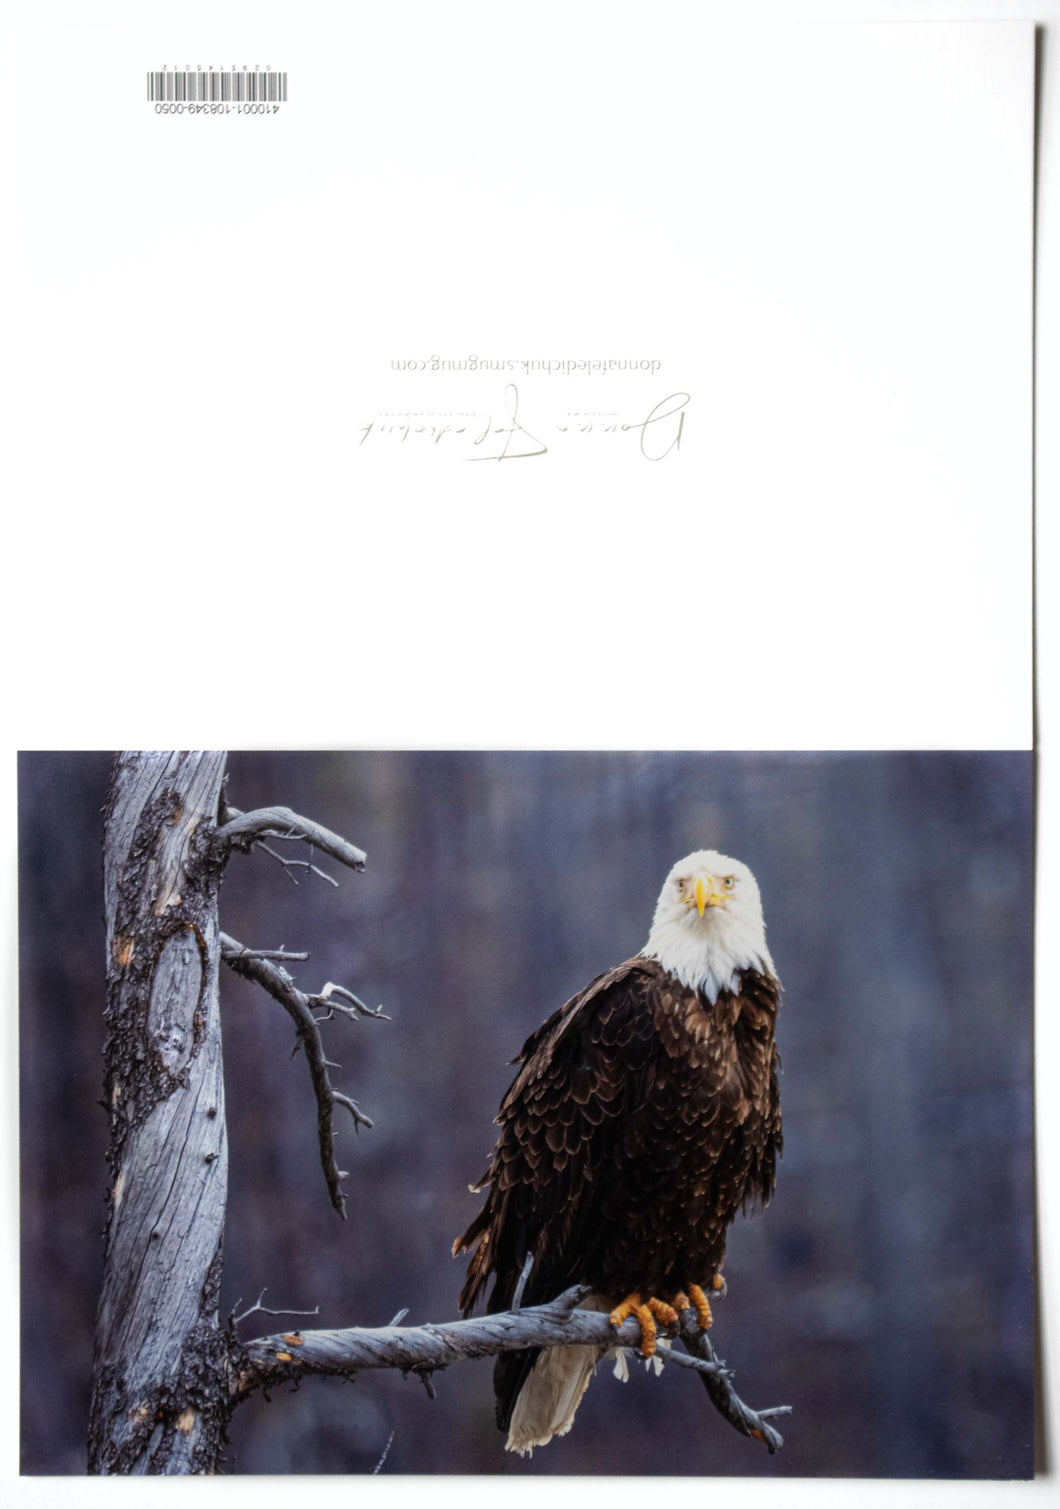 A fine art photography greeting card of a bald eagle